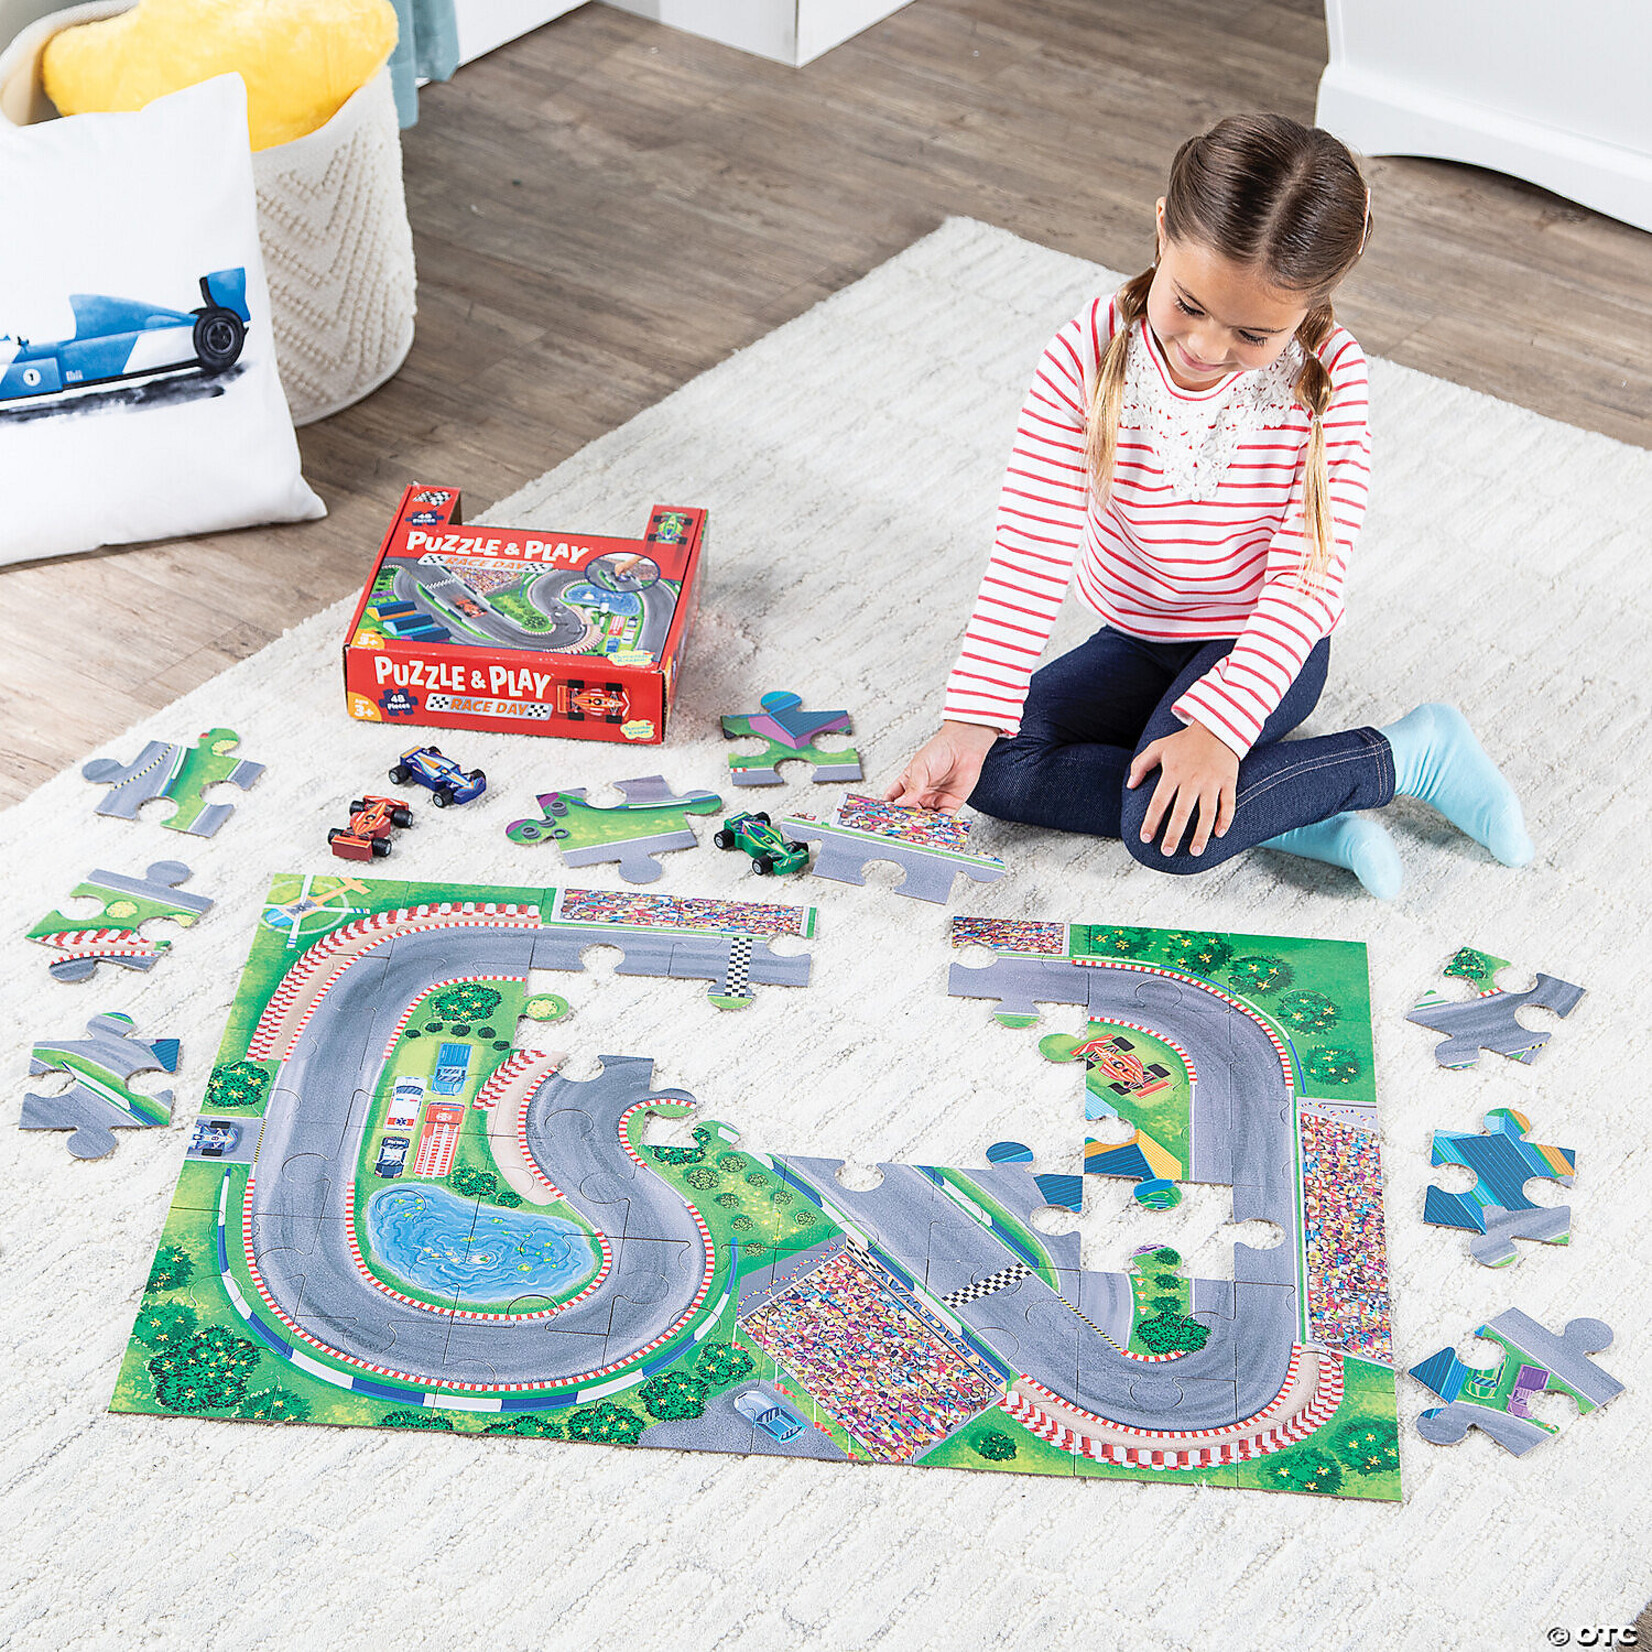 Mindware Puzzle & Play: Race Day Floor Puzzle